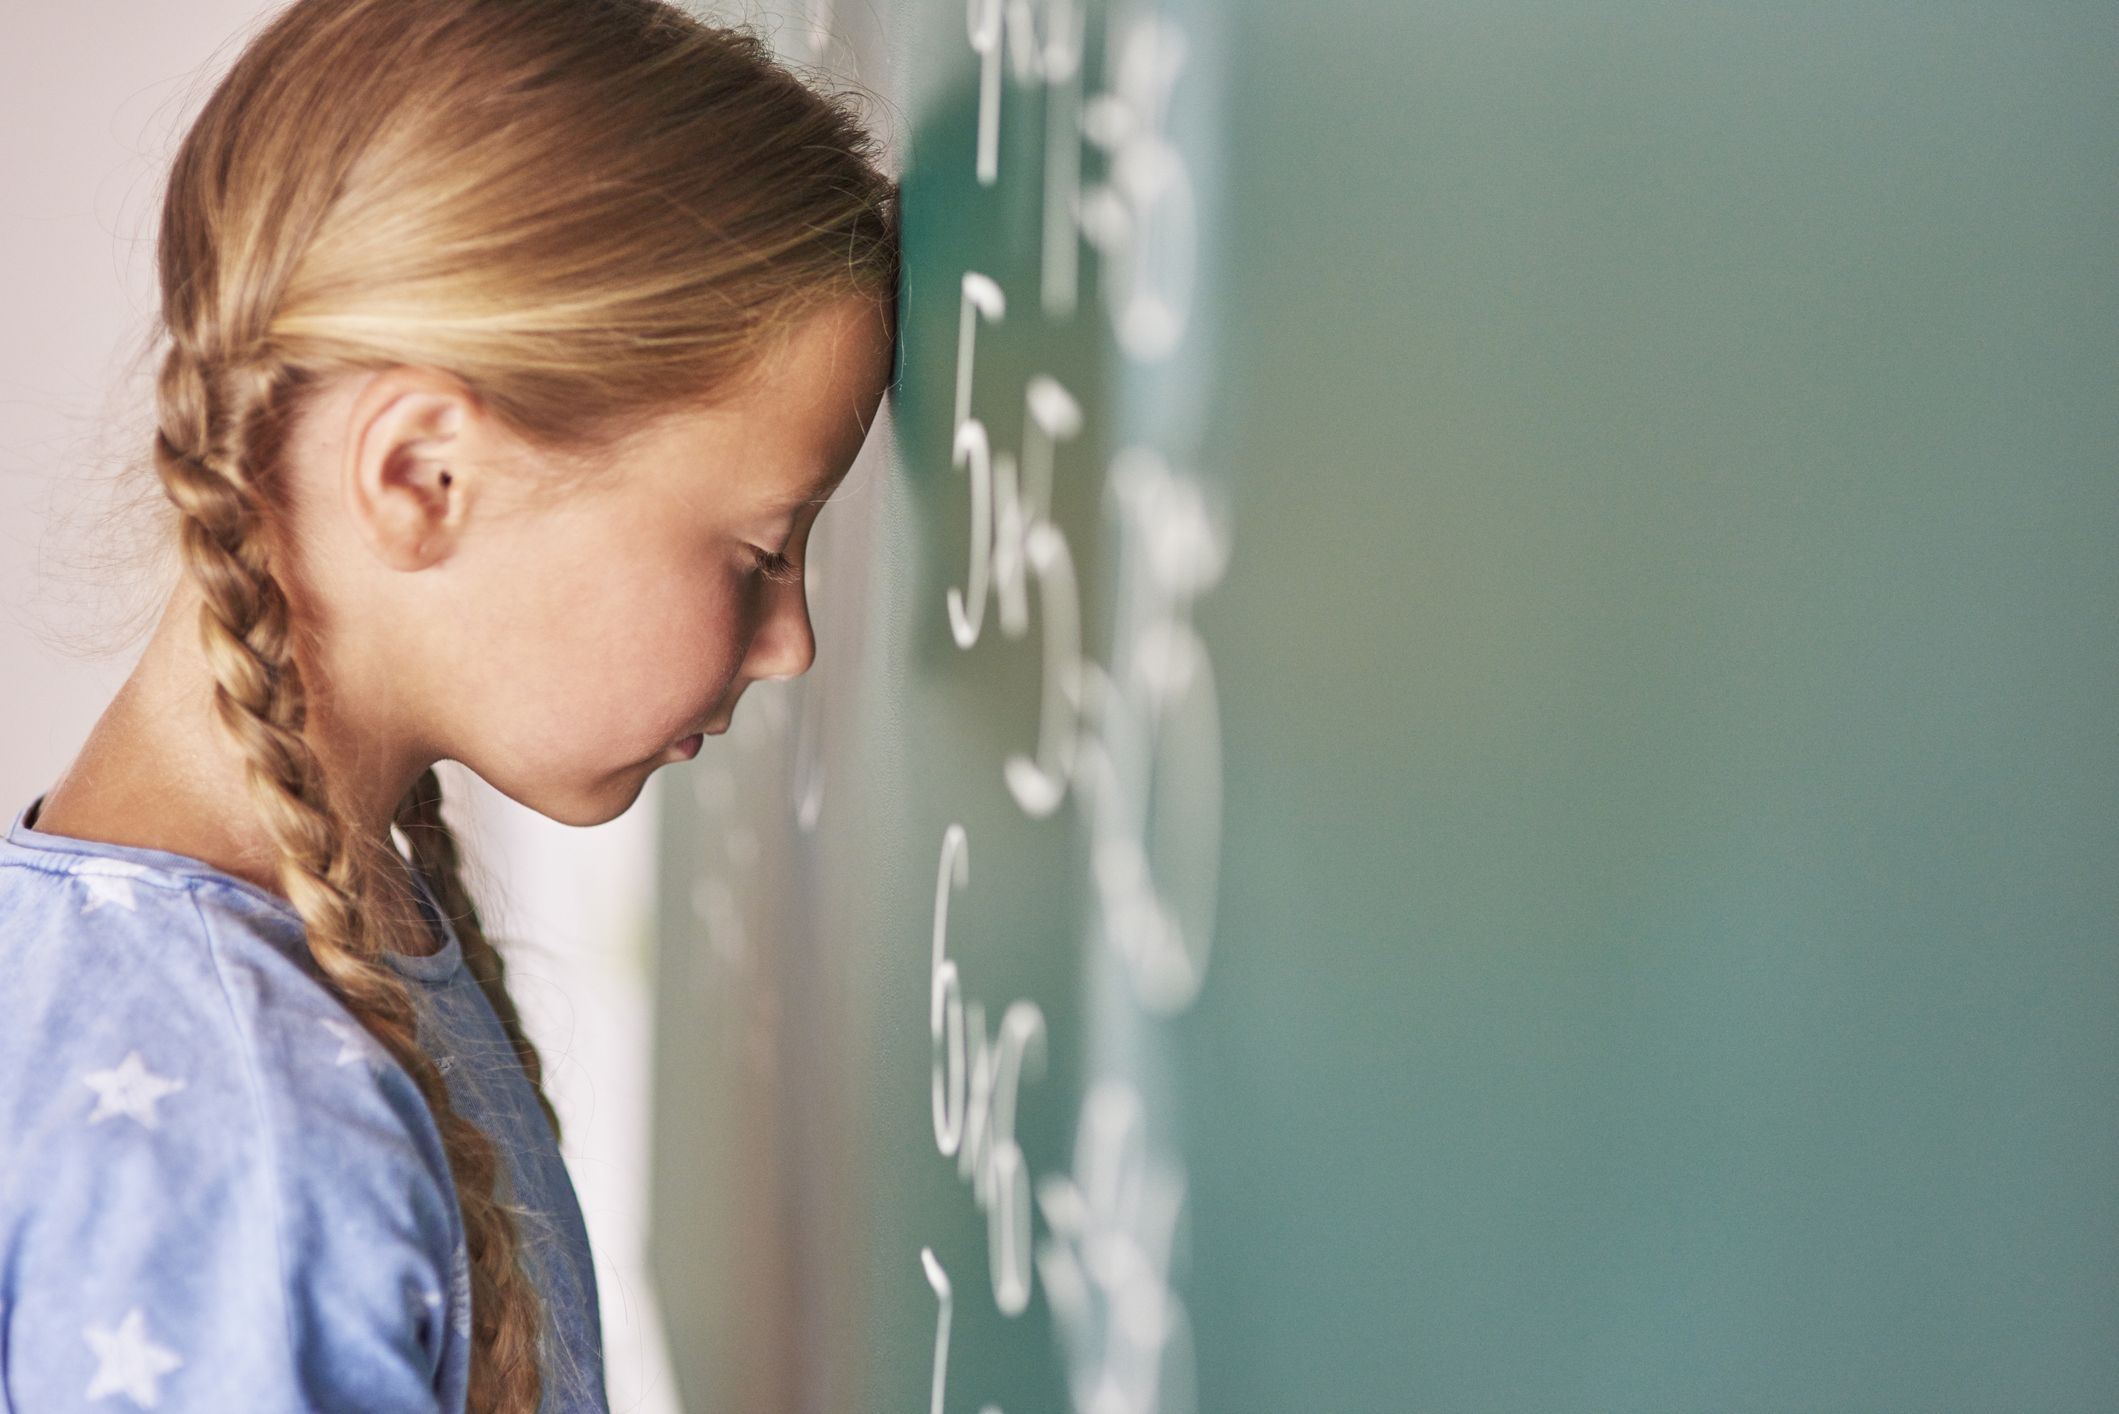 Kids Who Think They're Bad at Math Do Better in Tests if They Say Nice